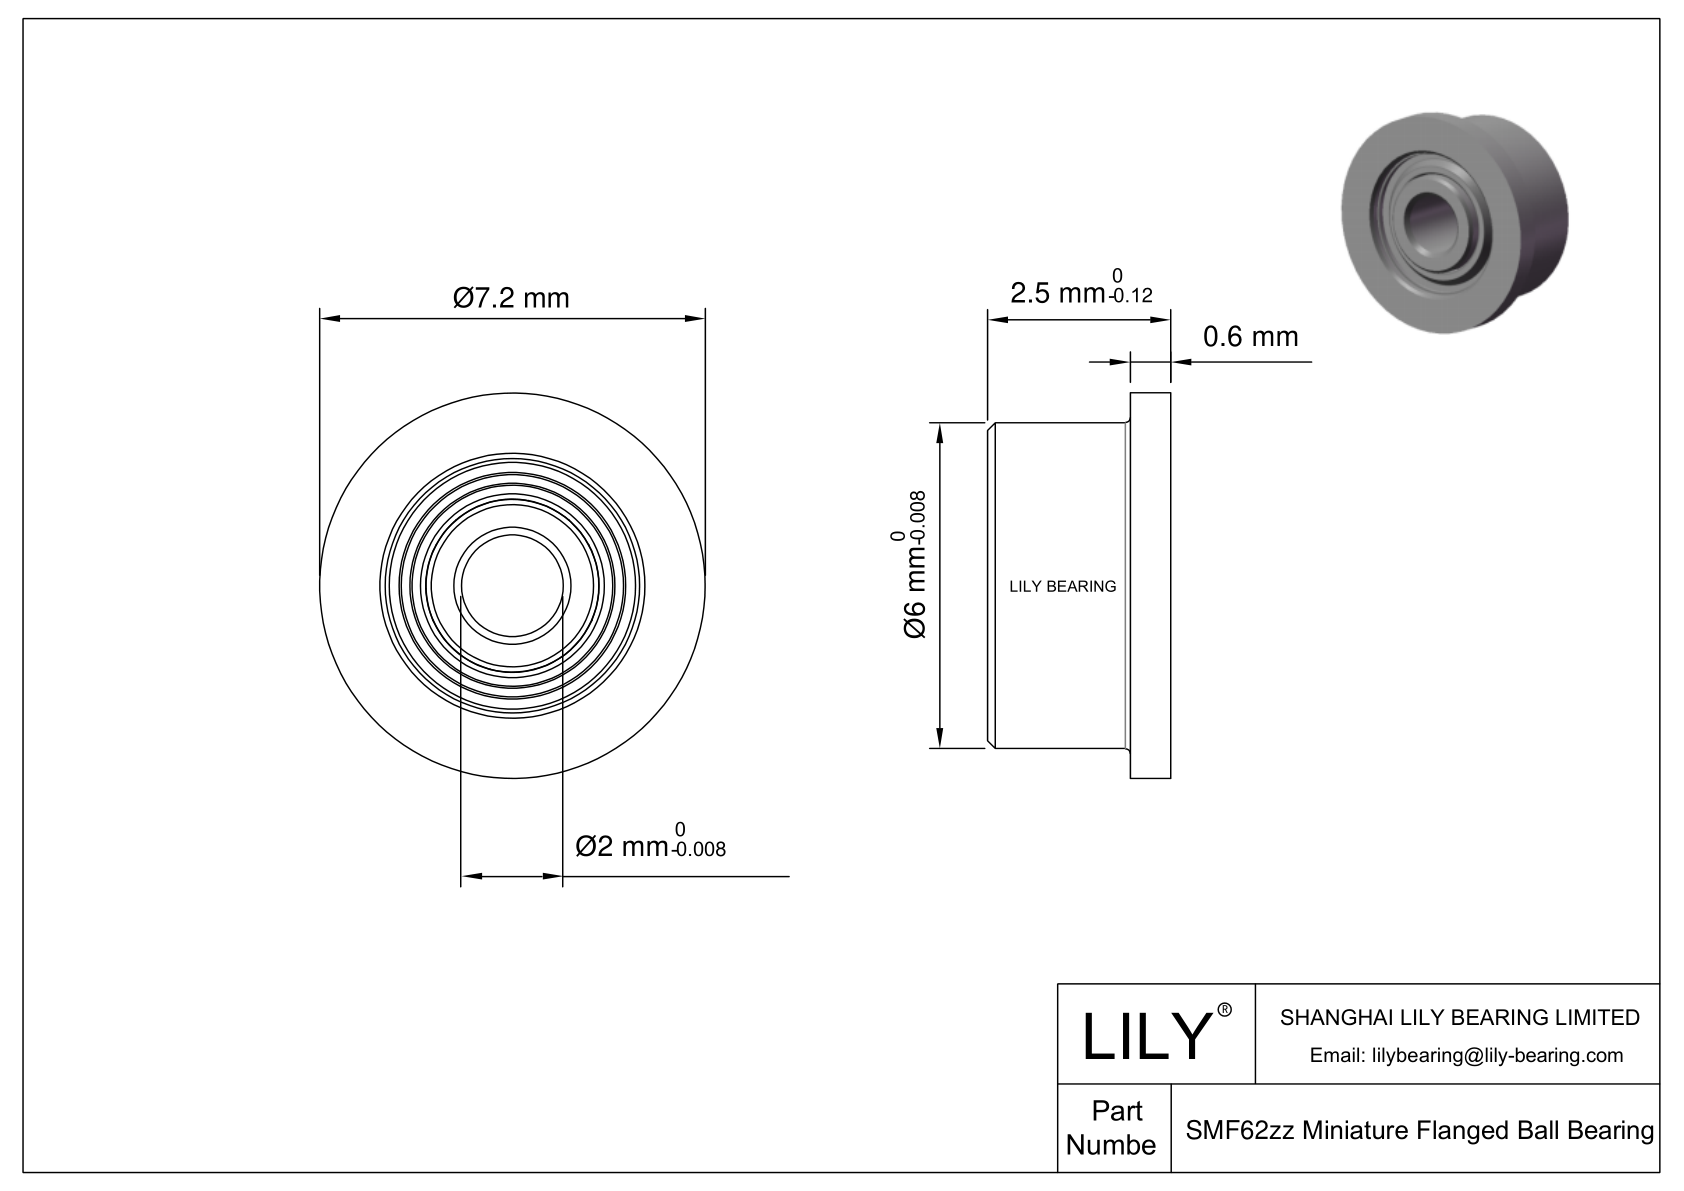 SMF62C-ZZ #3 PS2 Hybrid Ceramic Flanged Bearings cad drawing